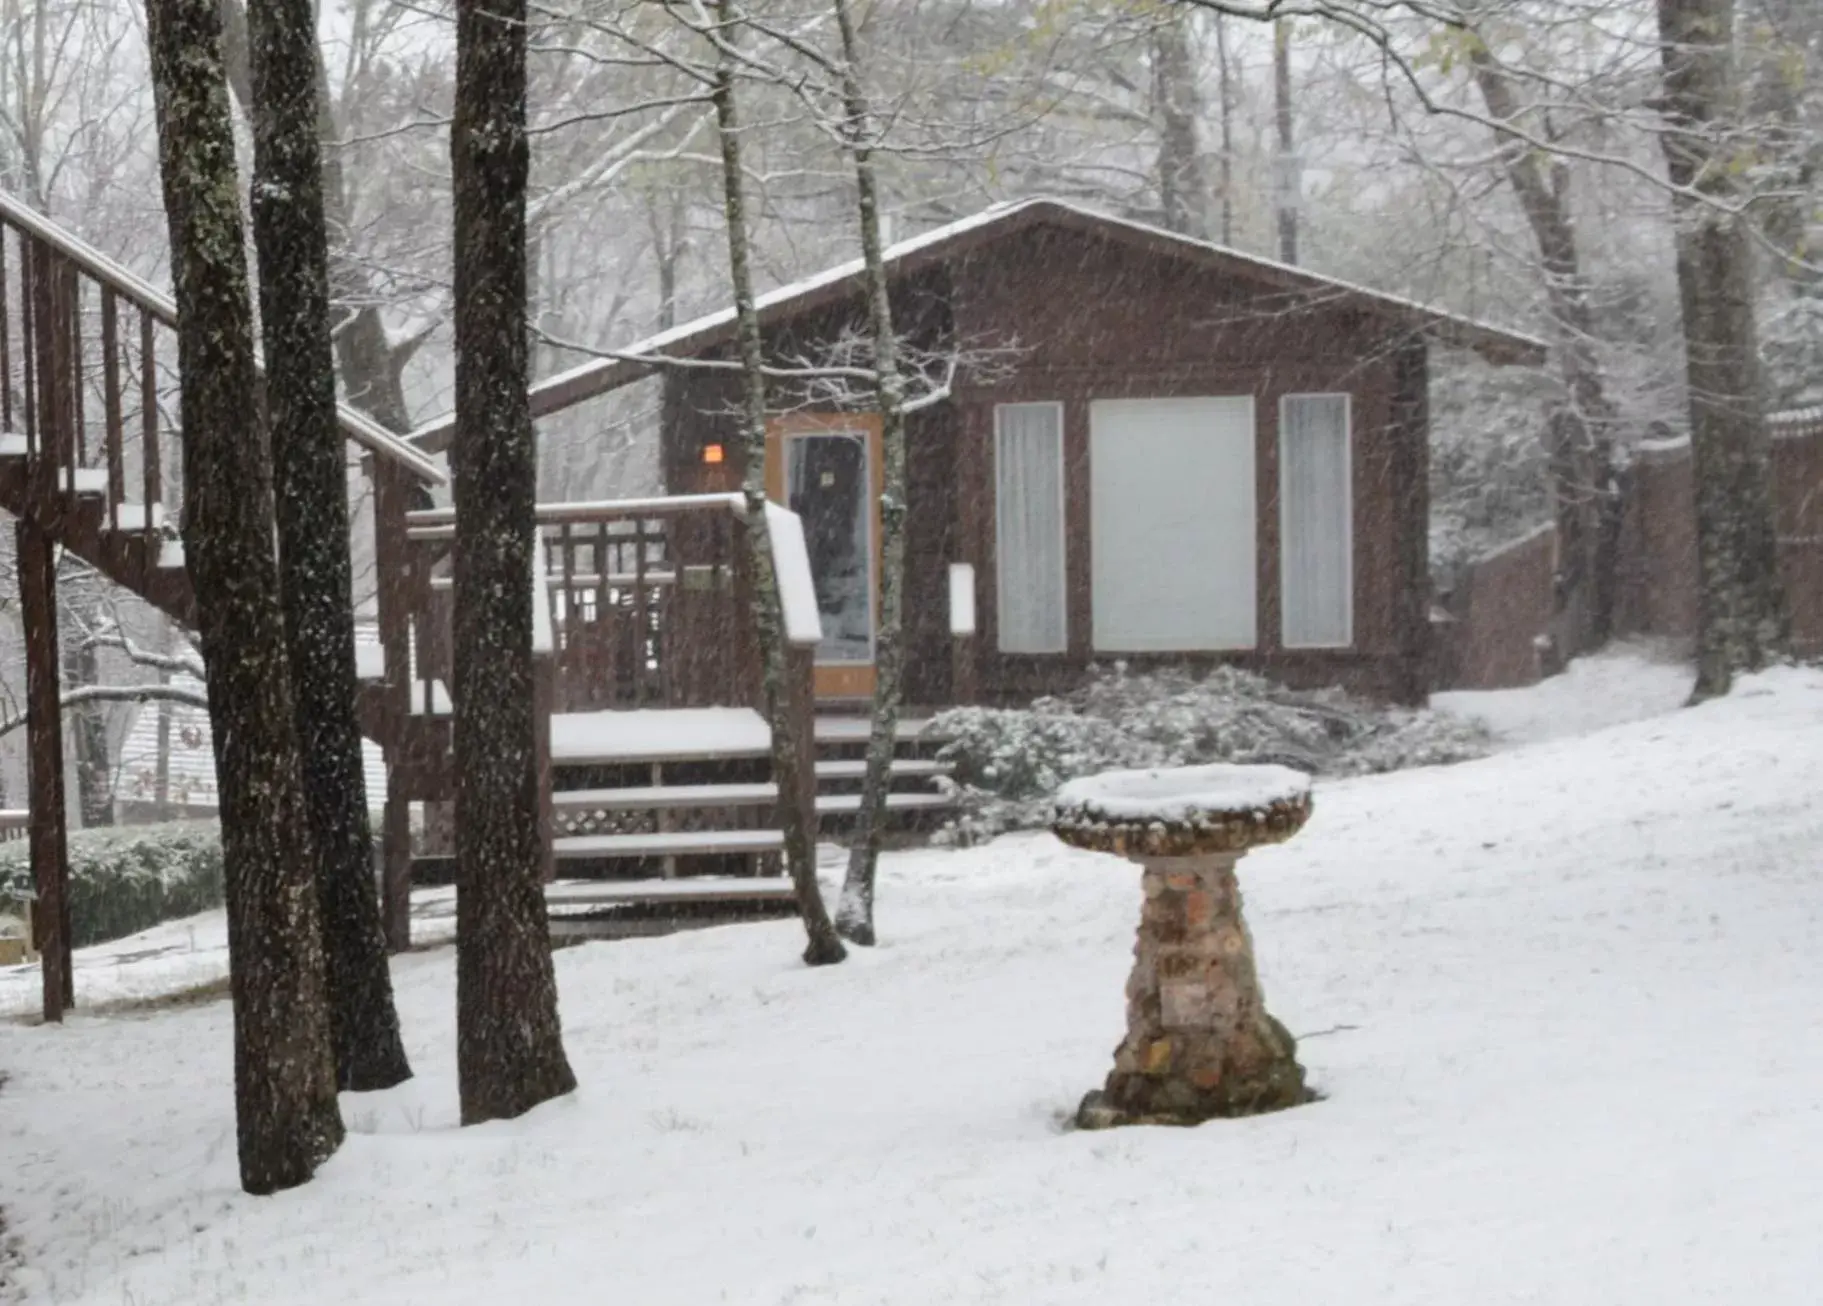 Property building, Winter in The Woods Cabins